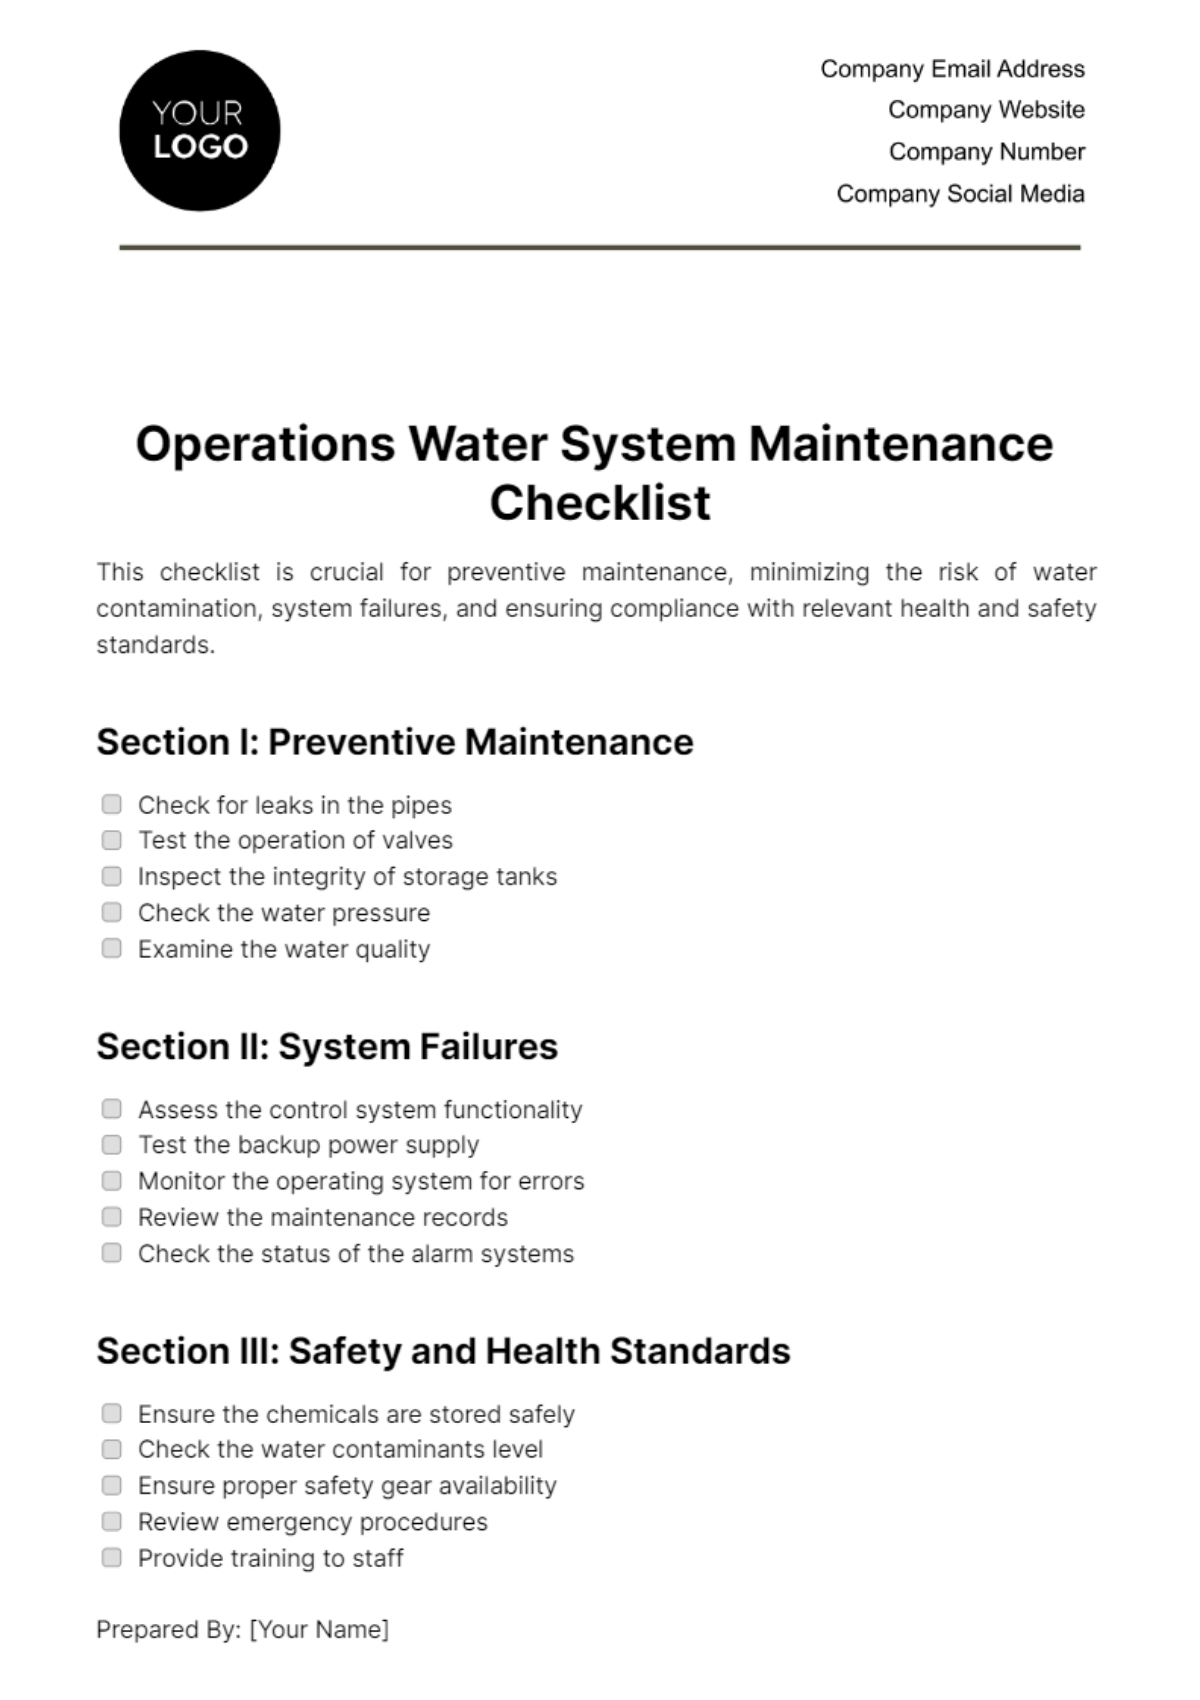 Free Operations Water System Maintenance Checklist Template